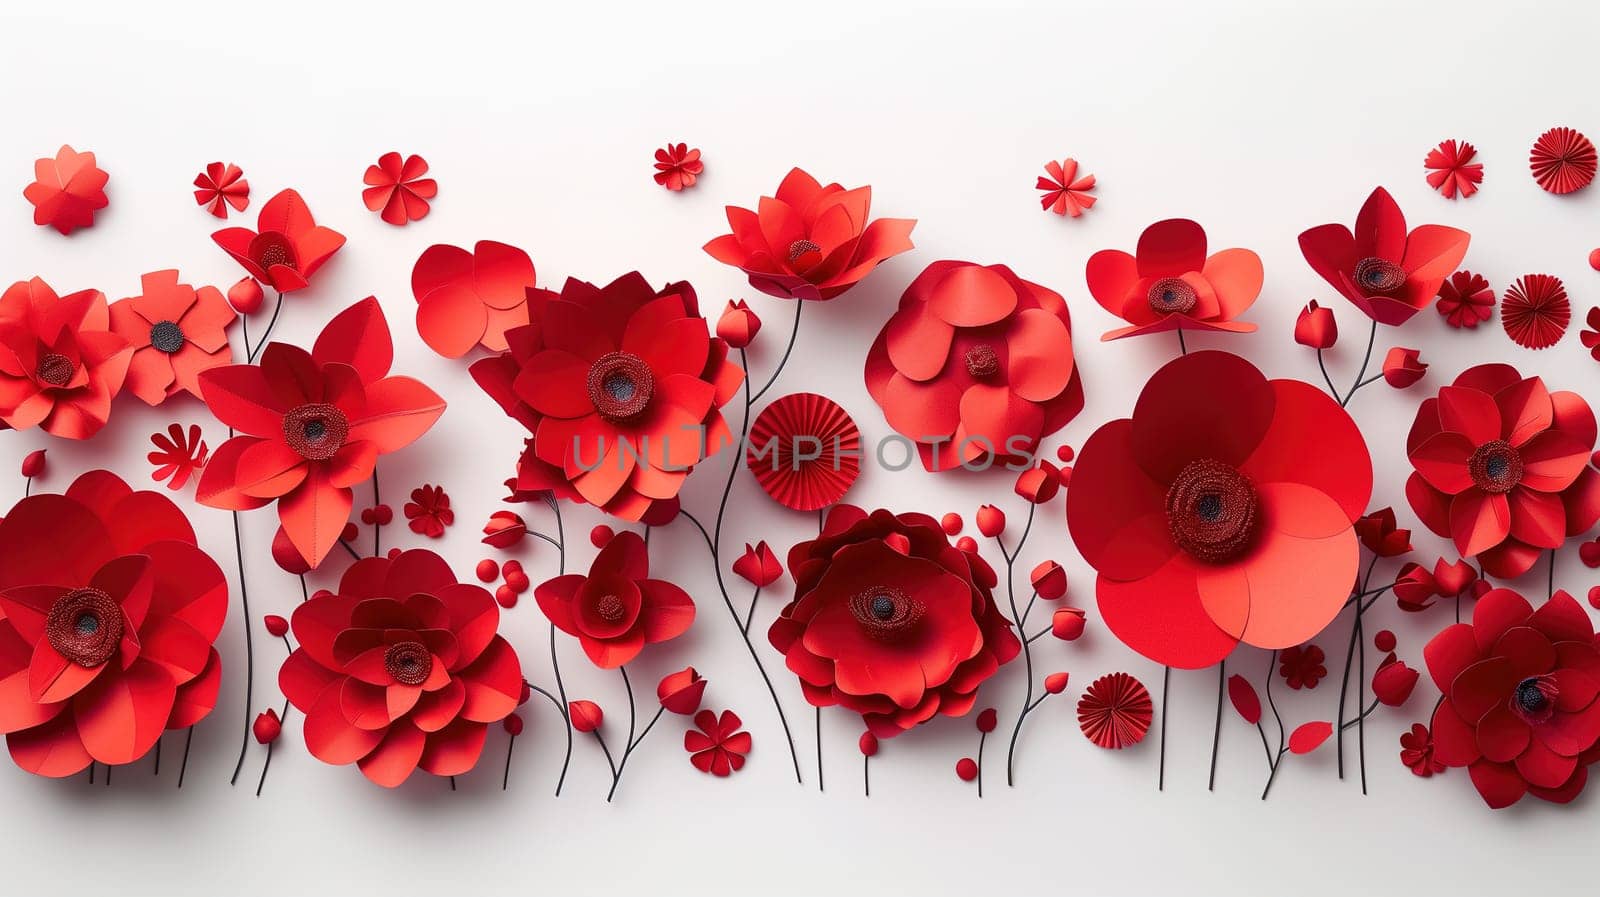 A cluster of vibrant red flowers blooms against a clean white wall, creating a striking contrast. The flowers are neatly arranged in a bunch, adding a pop of color to the minimalist backdrop.